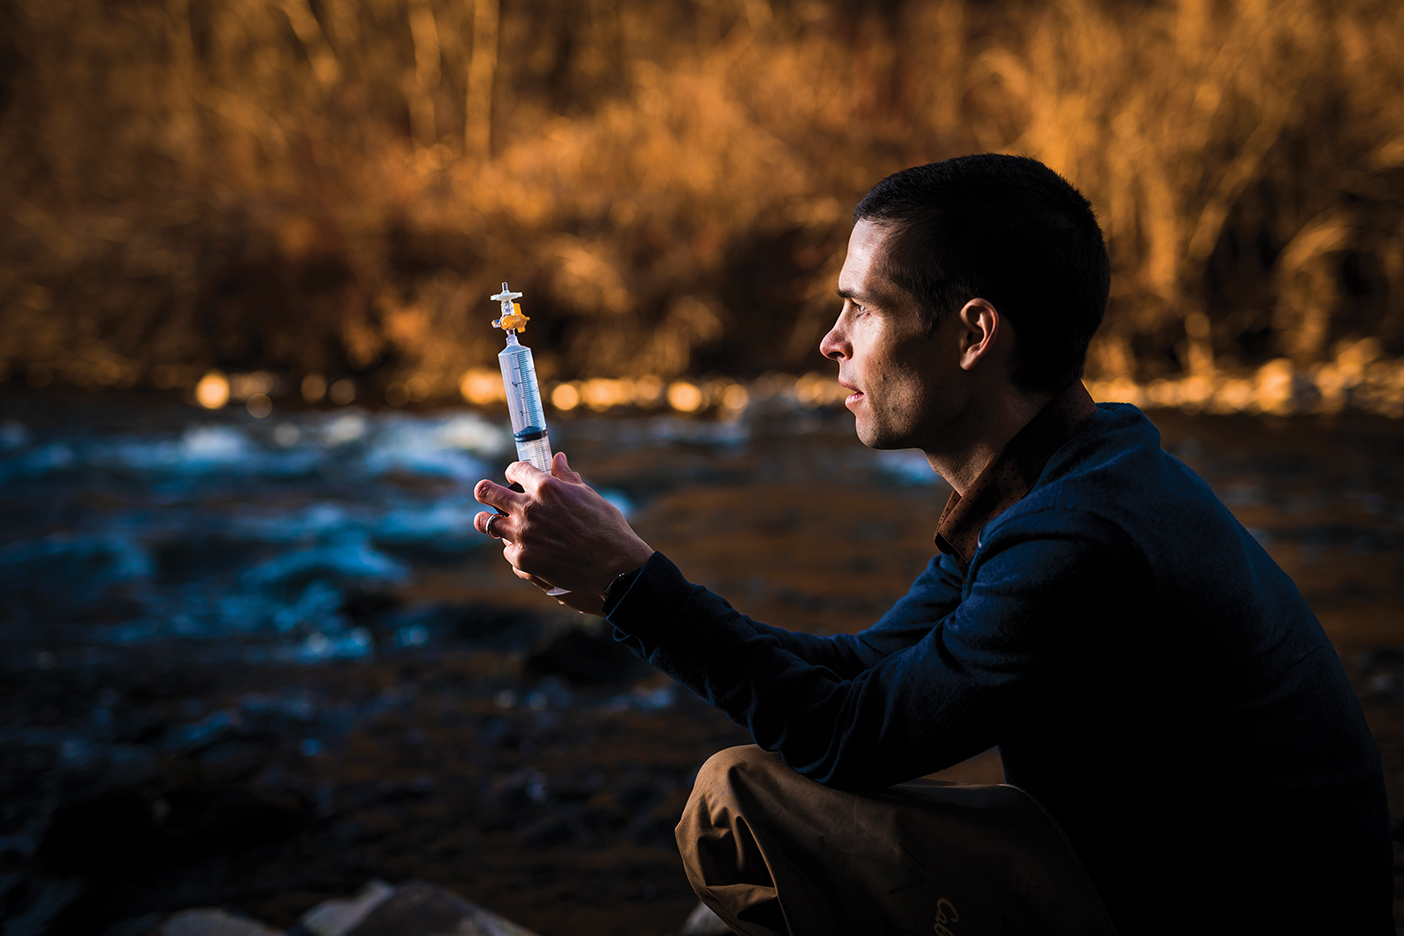 BYU professor Ben Abbott looking at a syringe, crouched in a stream.